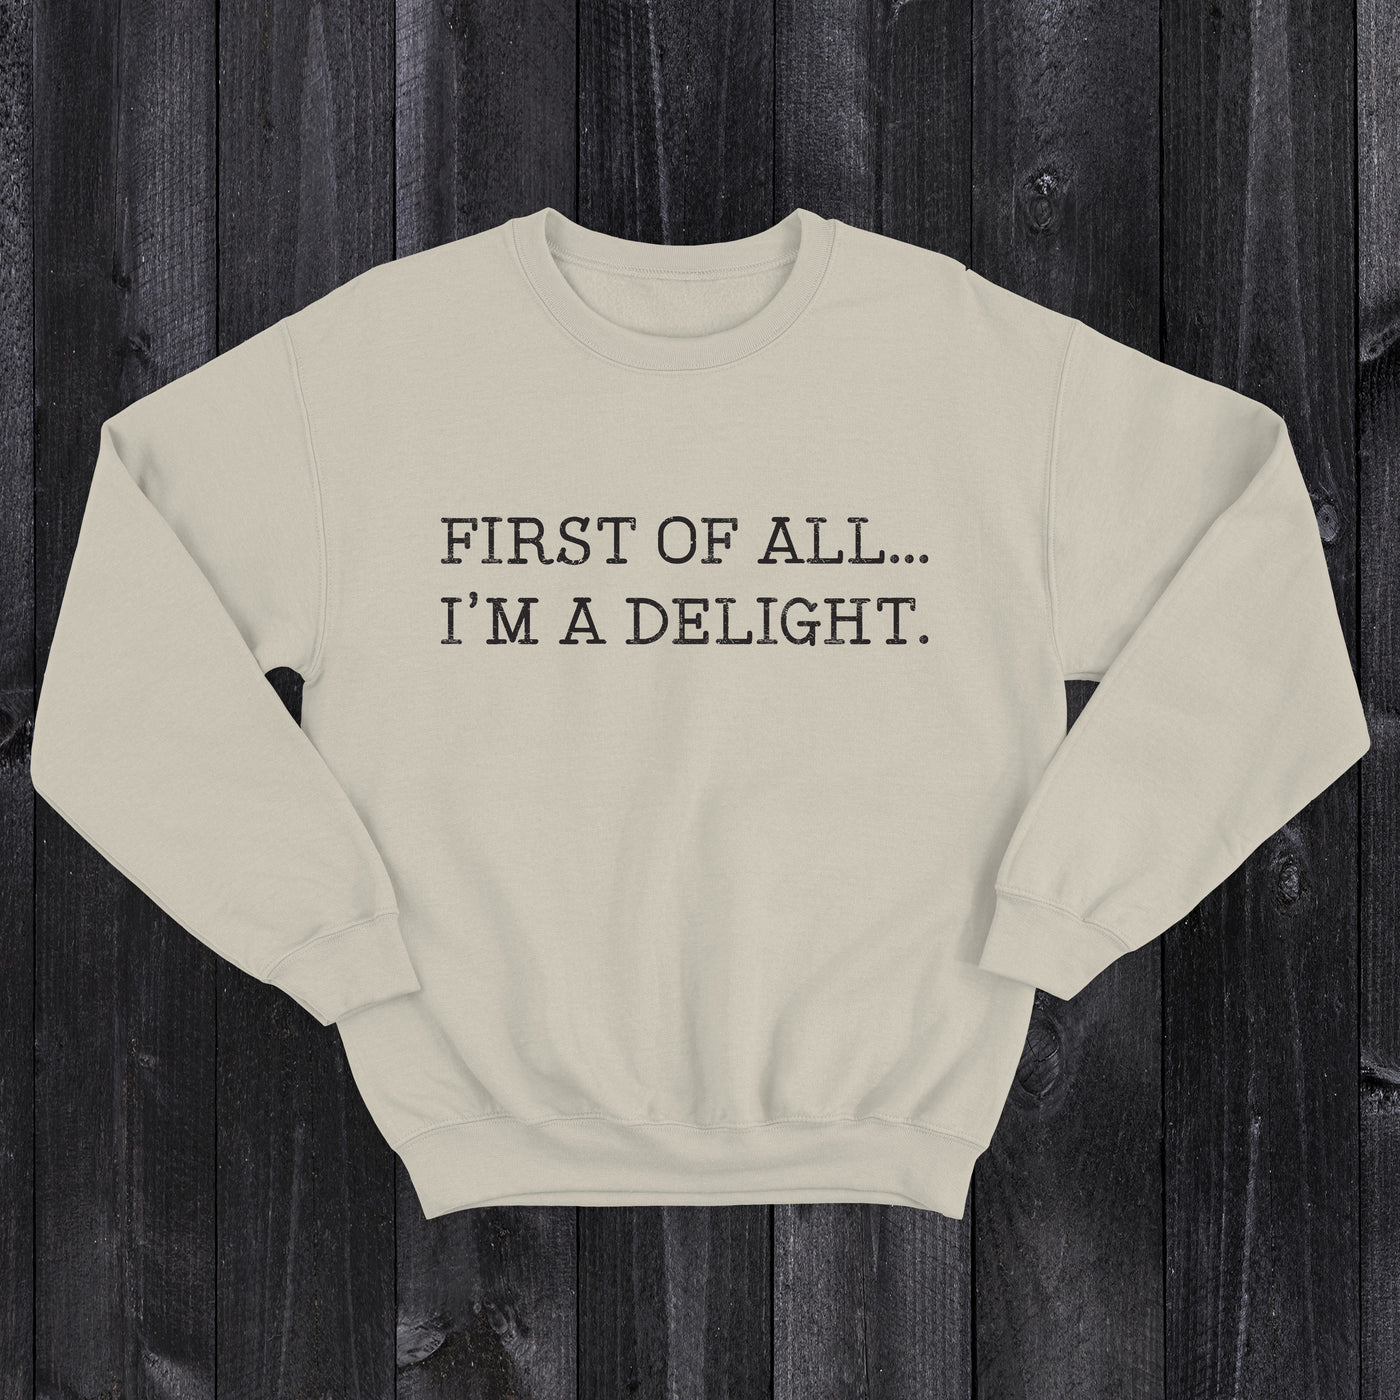 Daydream Tees I'm a Delight